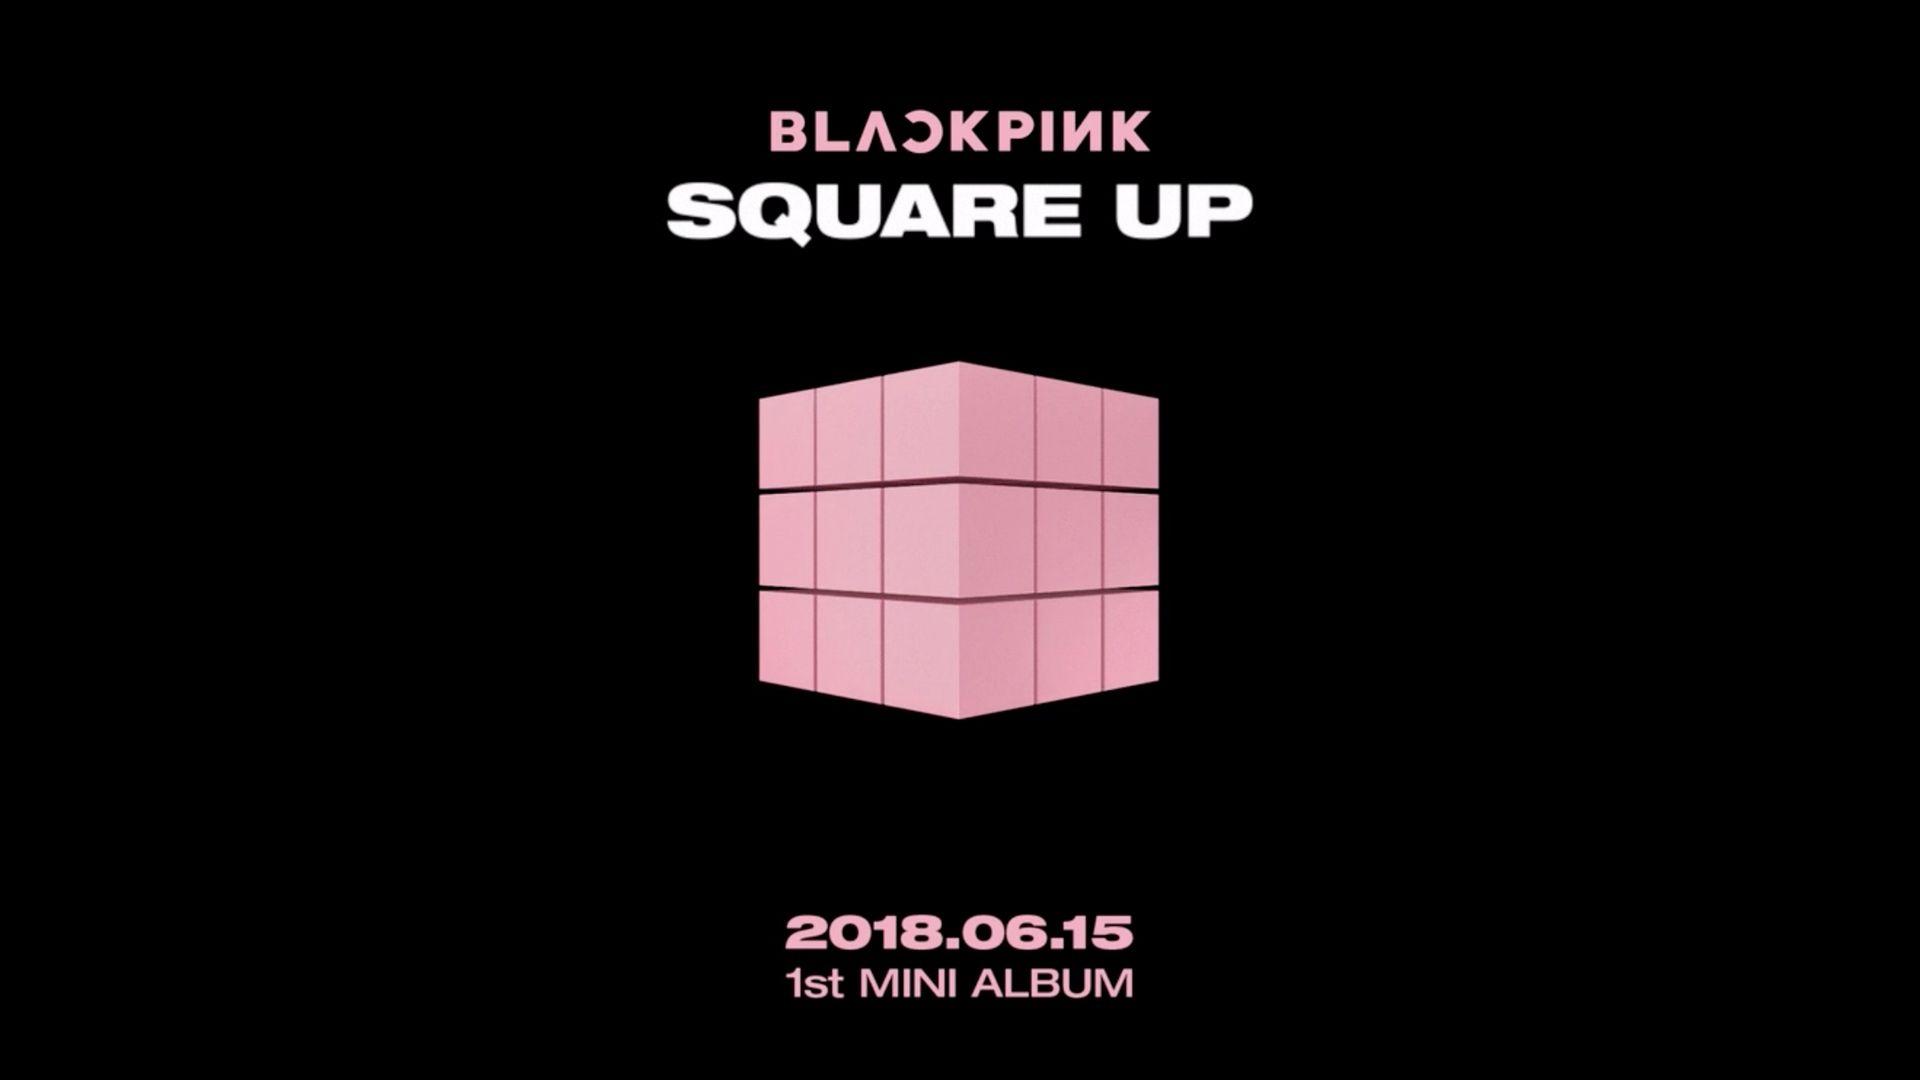 BLACKPINK Announce 1st Mini Album 'SQUARE UP' With Moving Poster